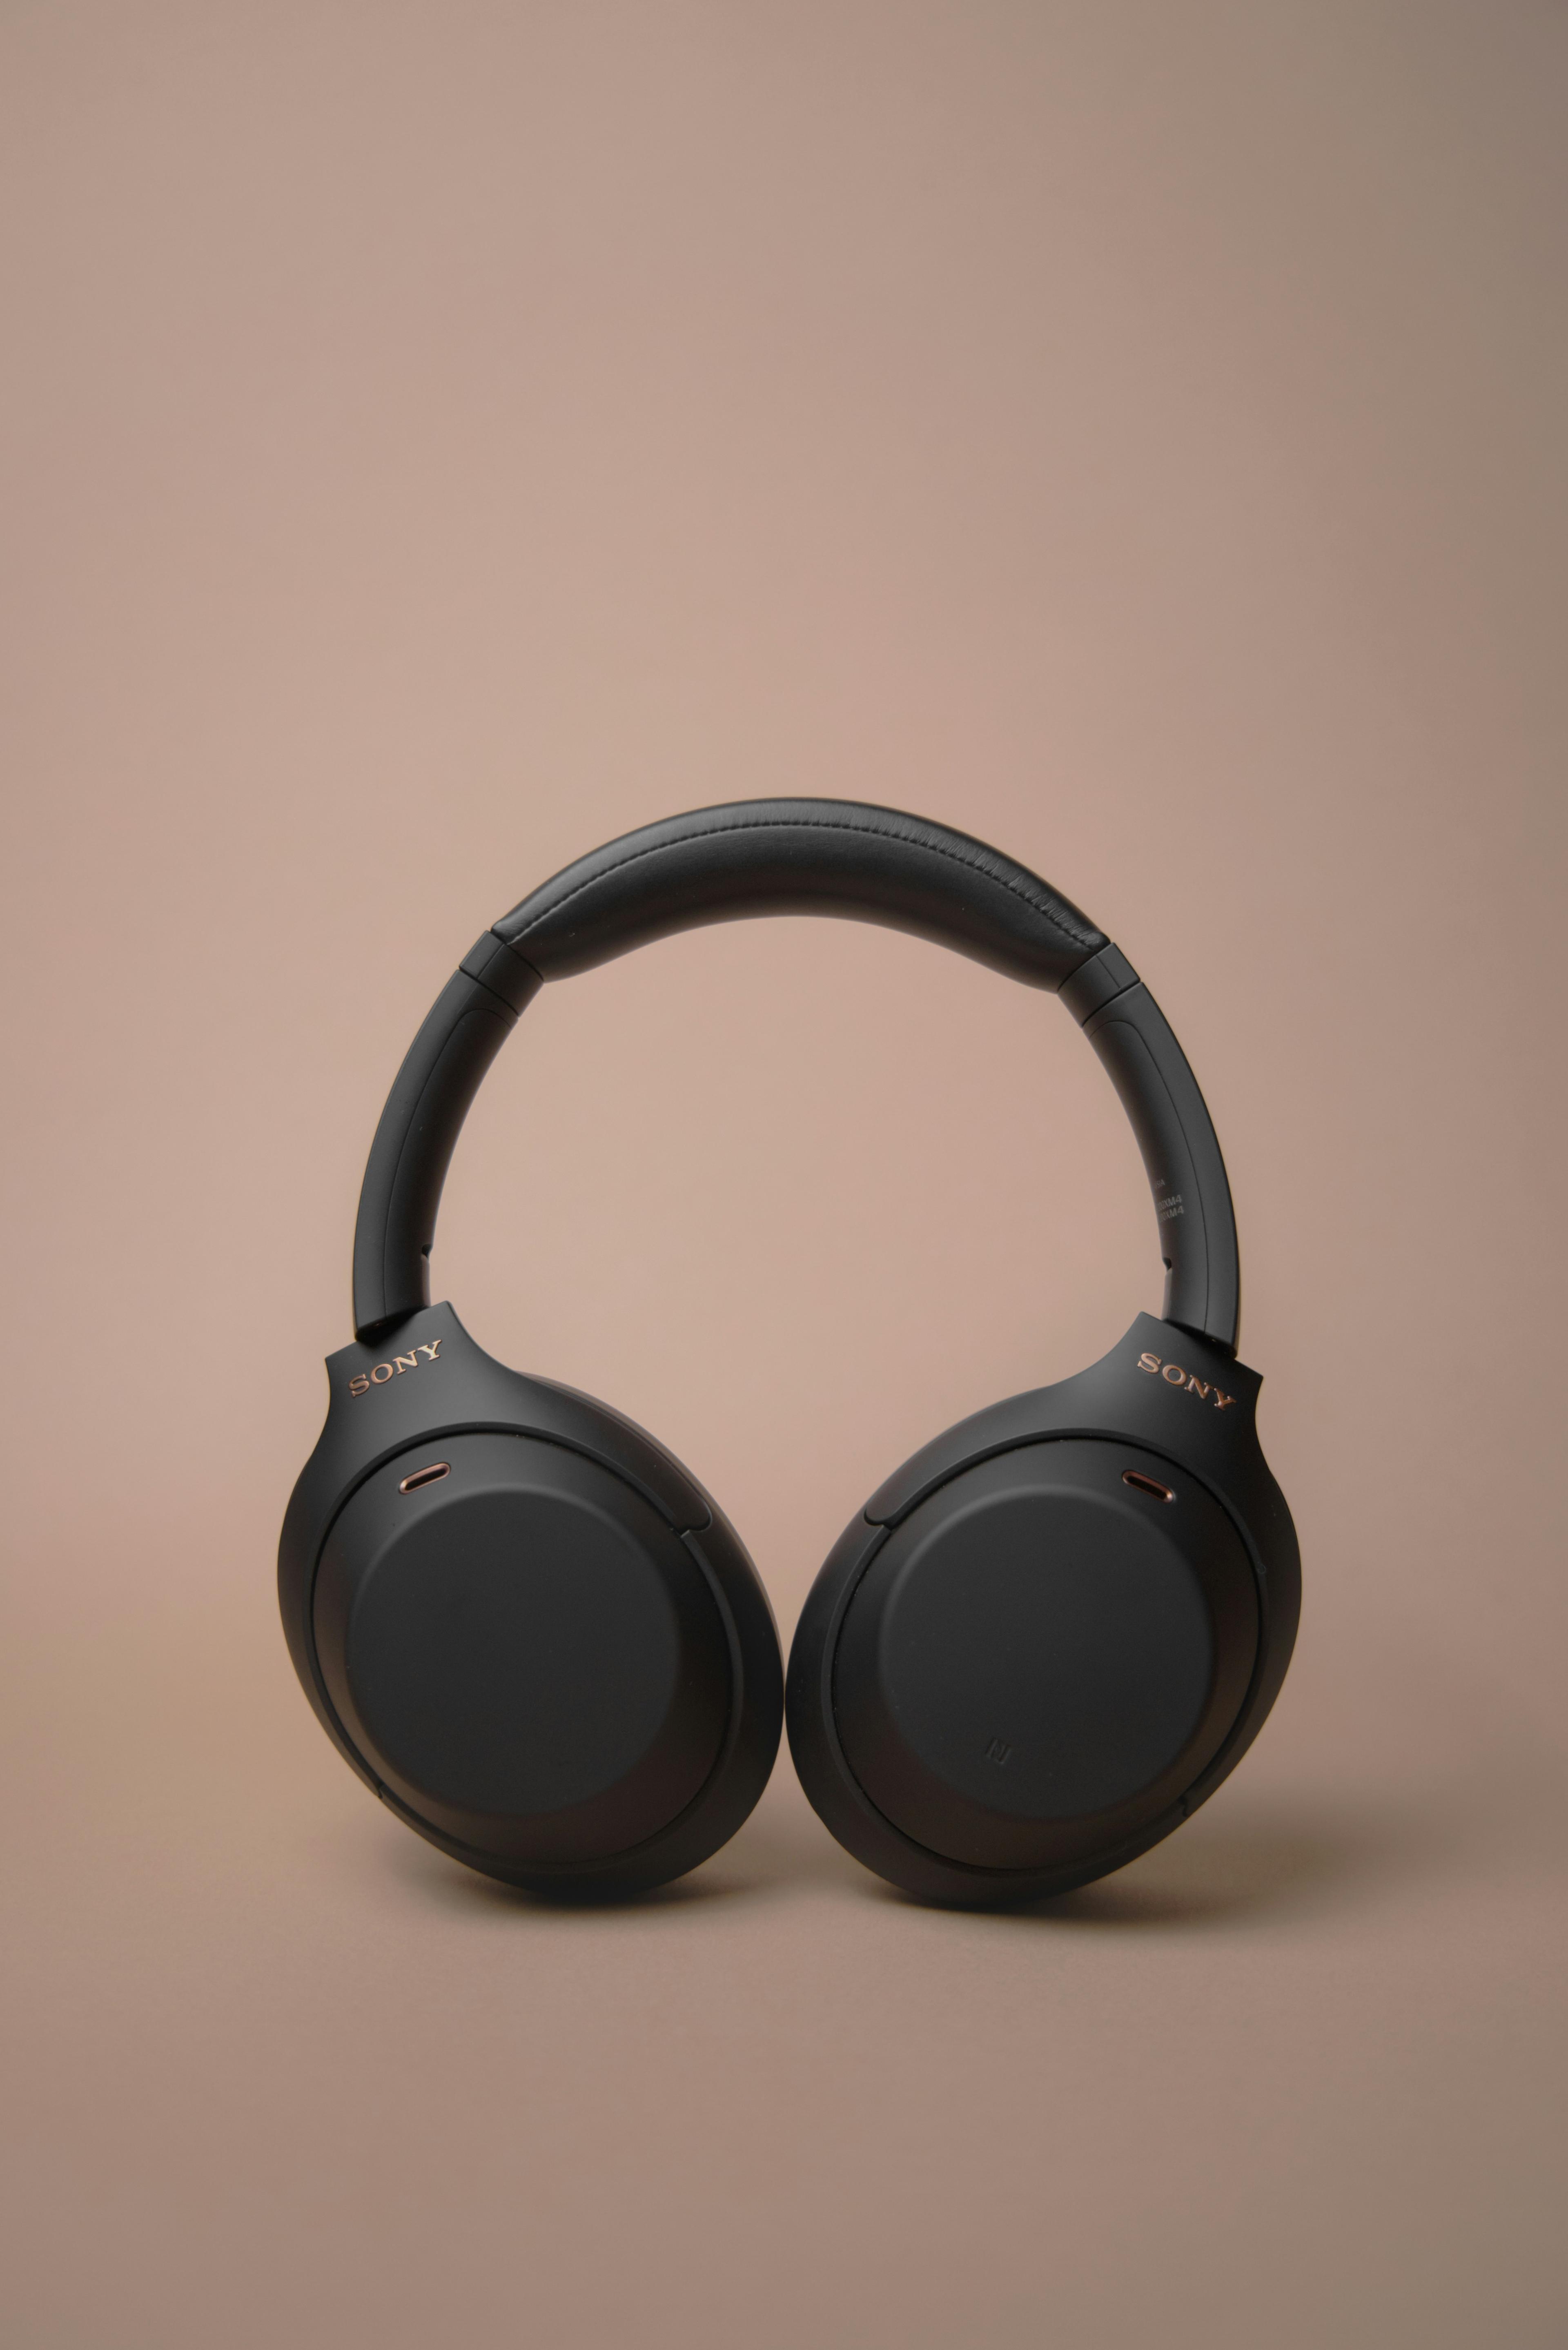 Experience high-quality audio with SonusBeat Pro. These wireless over-ear headphones deliver rich sound and deep bass. The ergonomic design provides comfort during extended listening sessions. With Bluetooth connectivity and a long battery life, you can enjoy your favorite music wirelessly for hours.